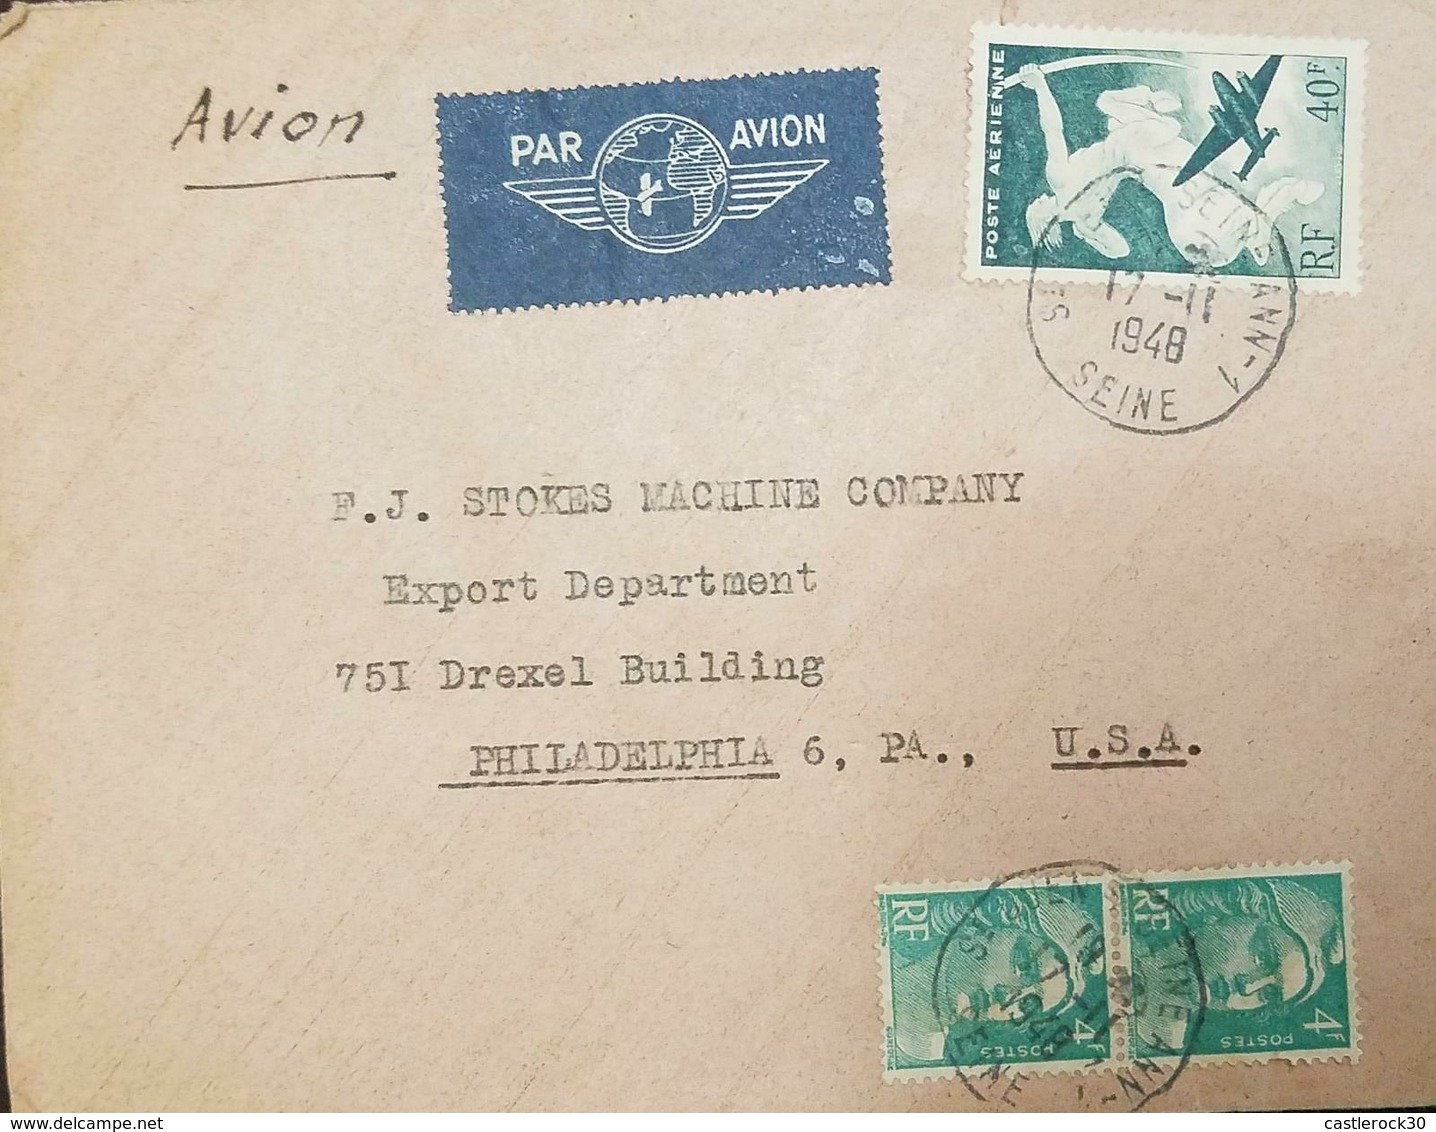 O) 1948 FRANCE, AIRMAIL, CENTAUR AND PLANE AP7 40F., MARIANNE 4F. TO PHILADELPHIA - 1927-1959 Covers & Documents